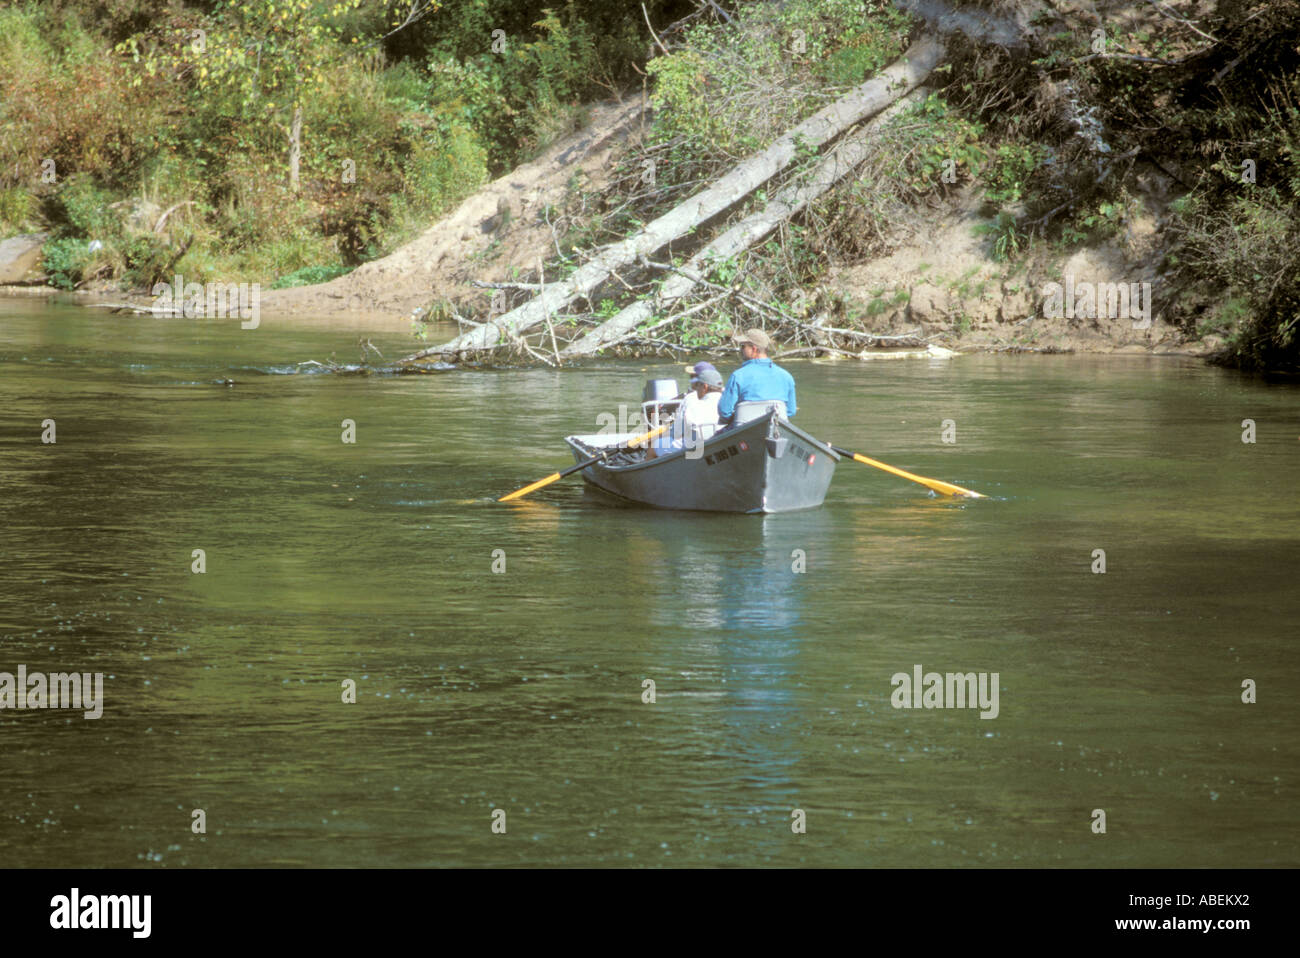 Fishing from a boat in a river Stock Photo